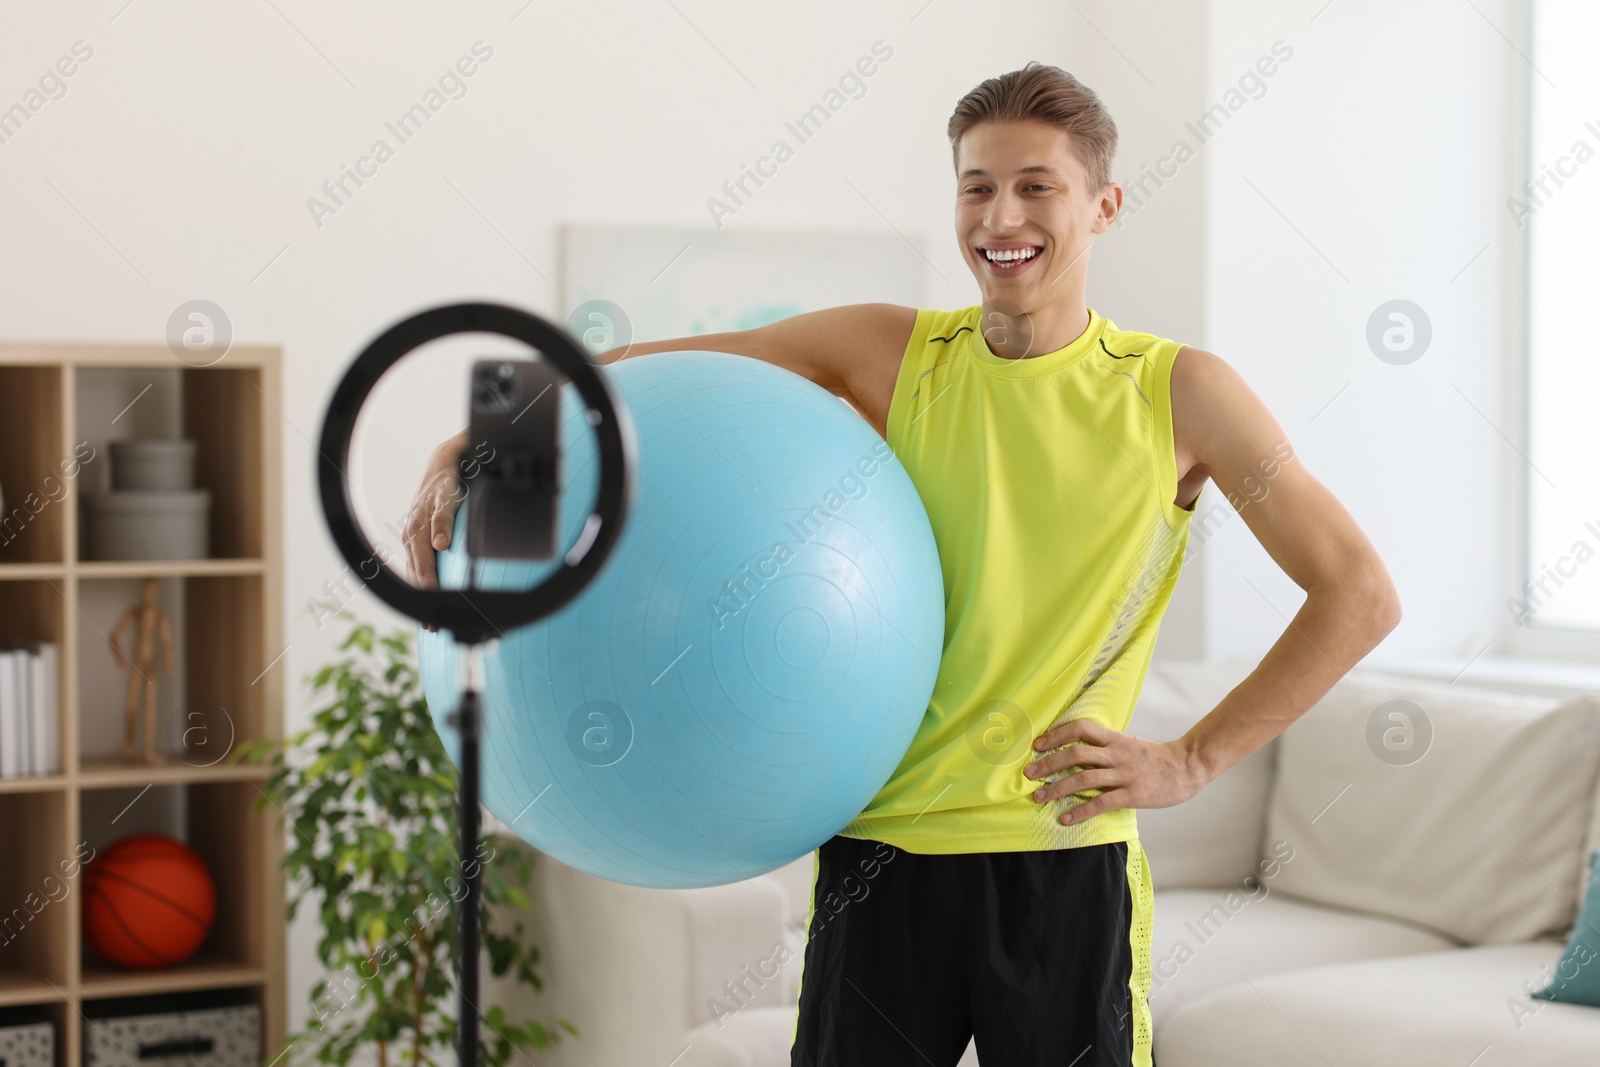 Photo of Smiling sports blogger holding fit ball while streaming online fitness lesson at home